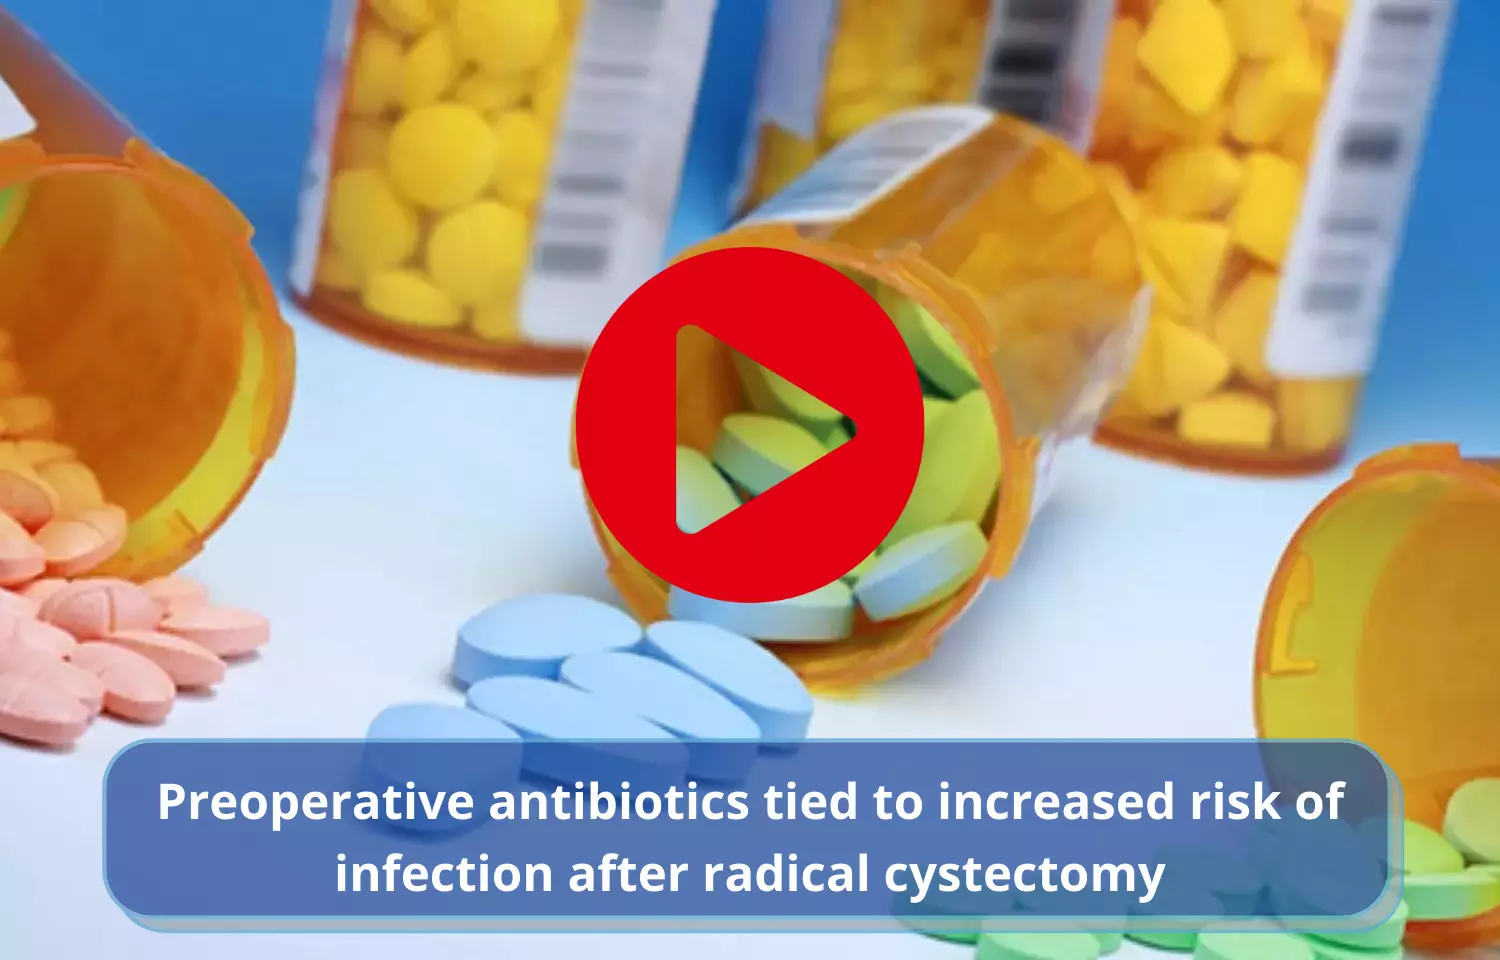 Preoperative antibiotics tied to increased risk of infection after radical cystectomy